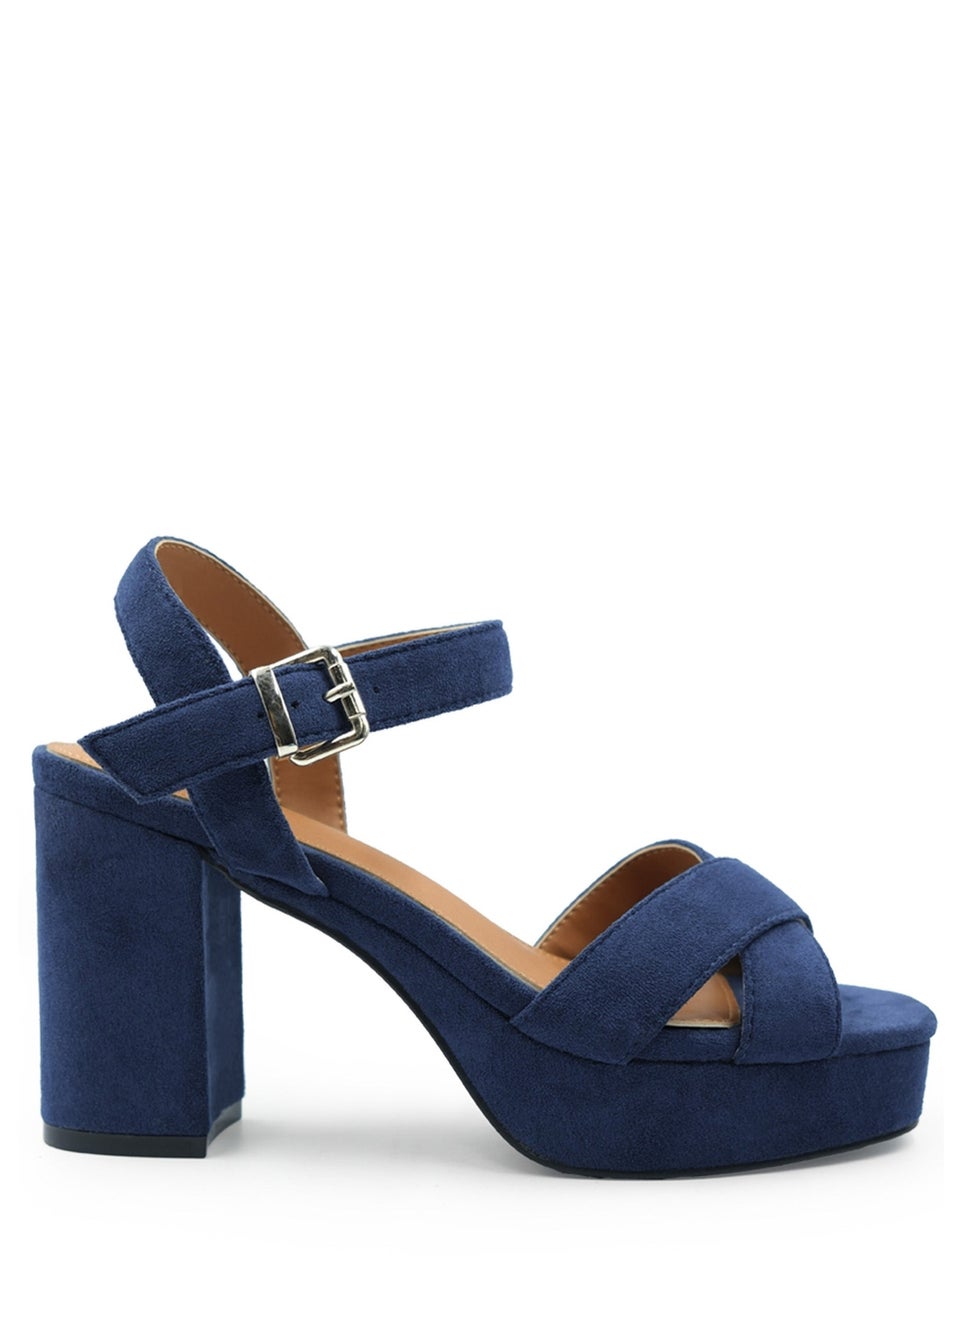 Where's That From Navy Marcia Wide Fit Suede Platform Heels